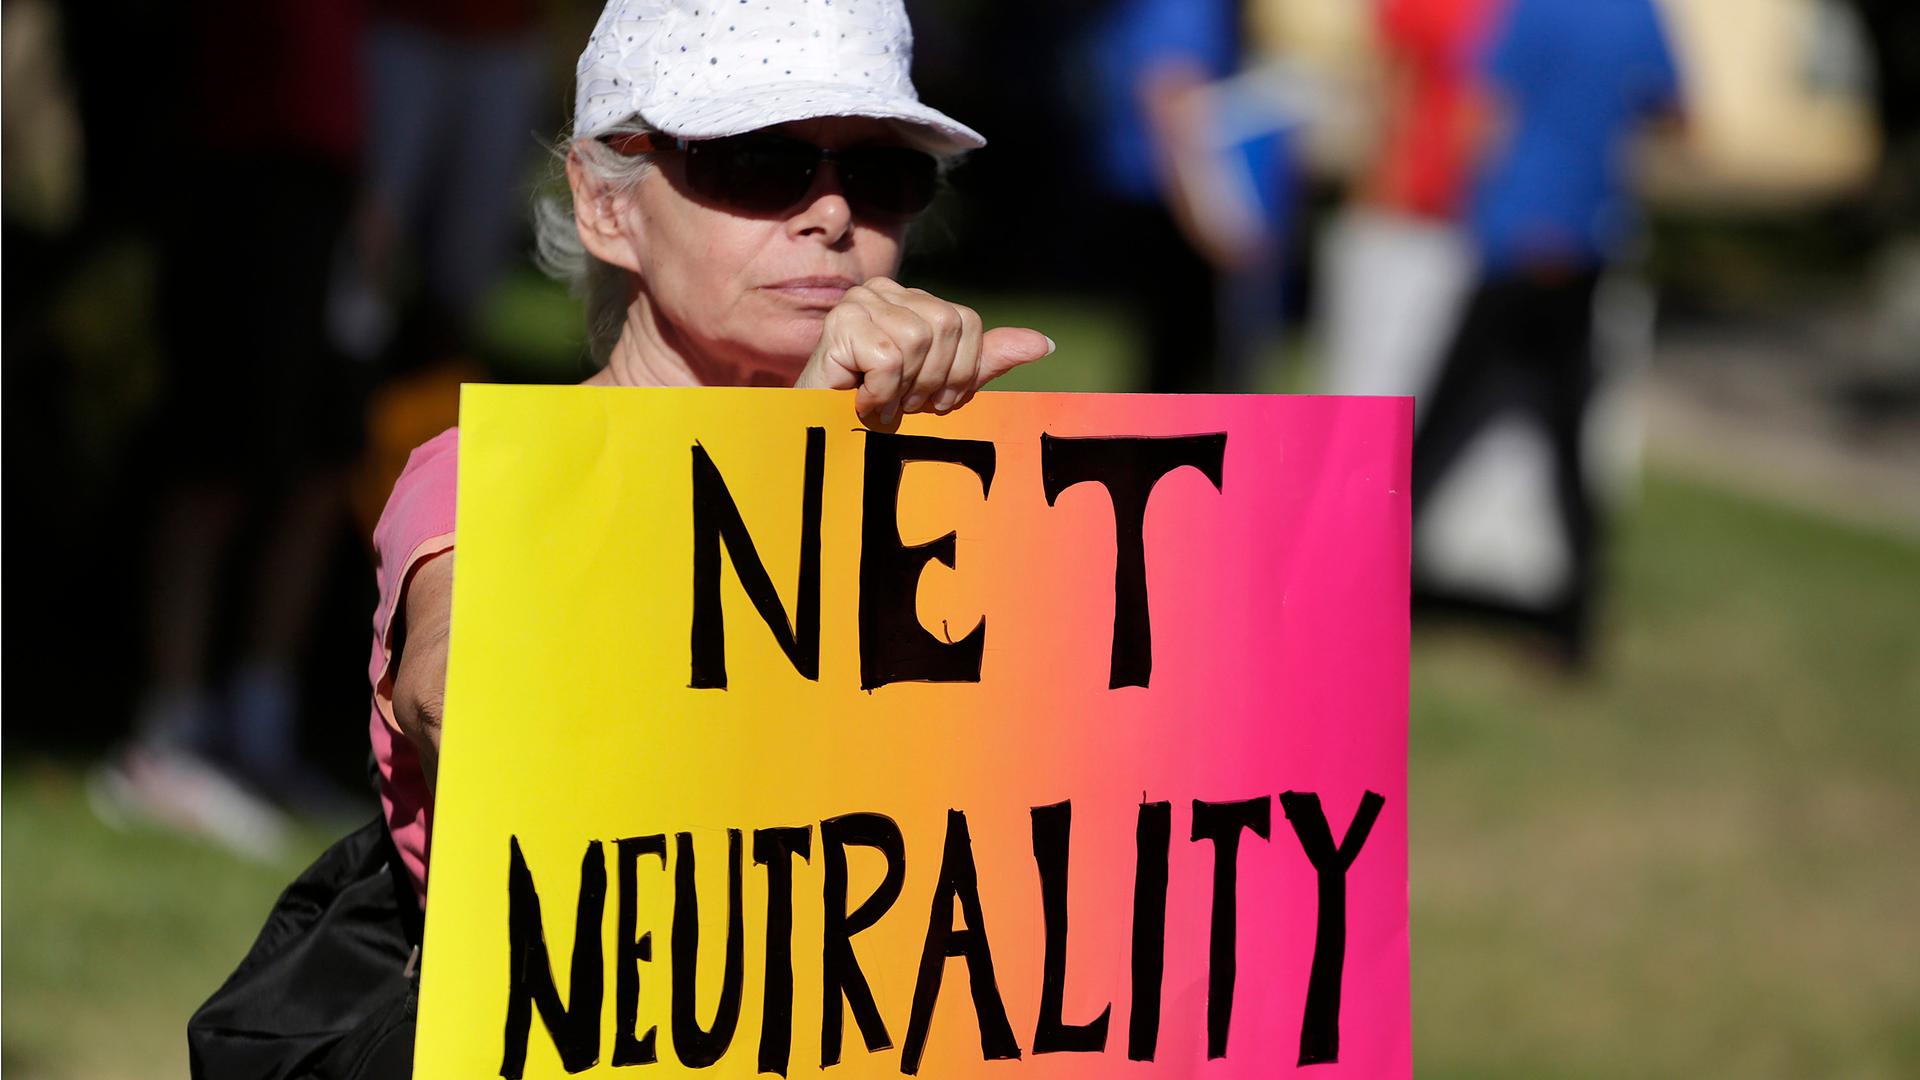 Lori Erlendsson attends a pro-net neutrality Internet activist rally in Los Angeles.